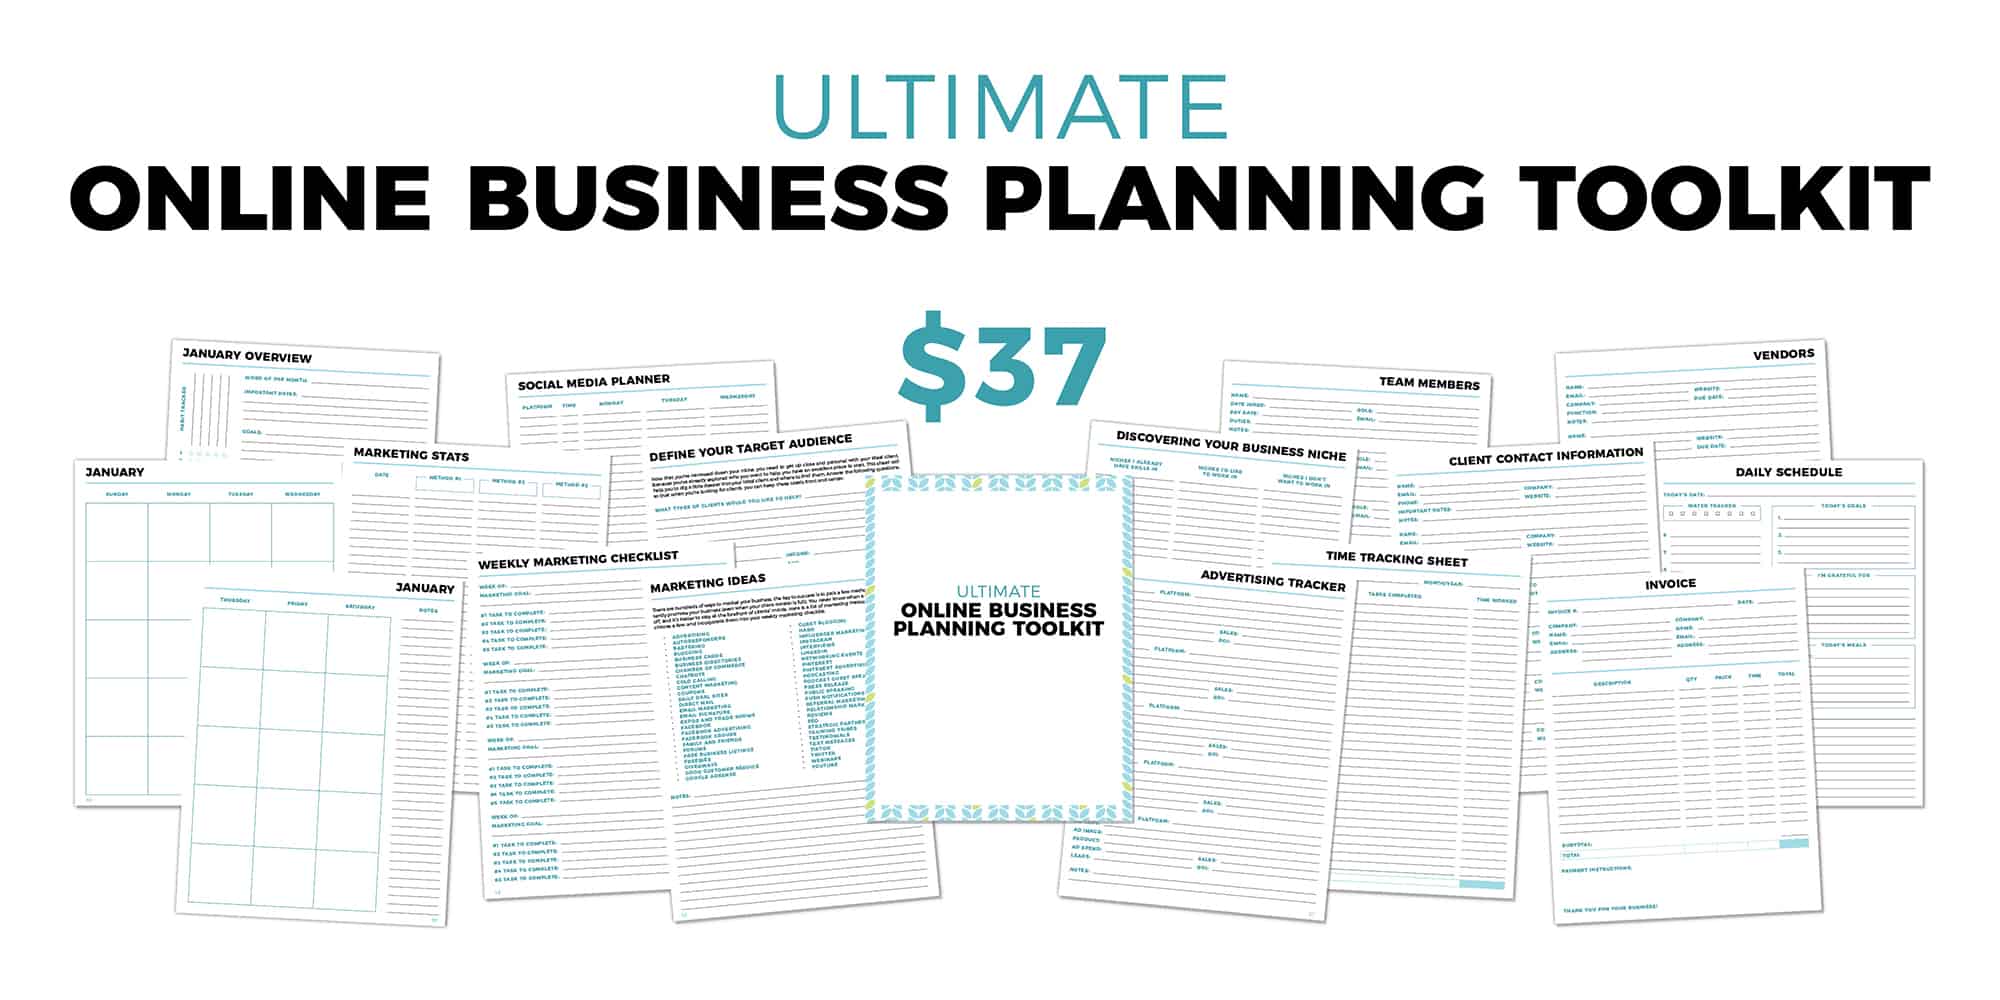 Ultimate Online Business Planning Toolkit $37